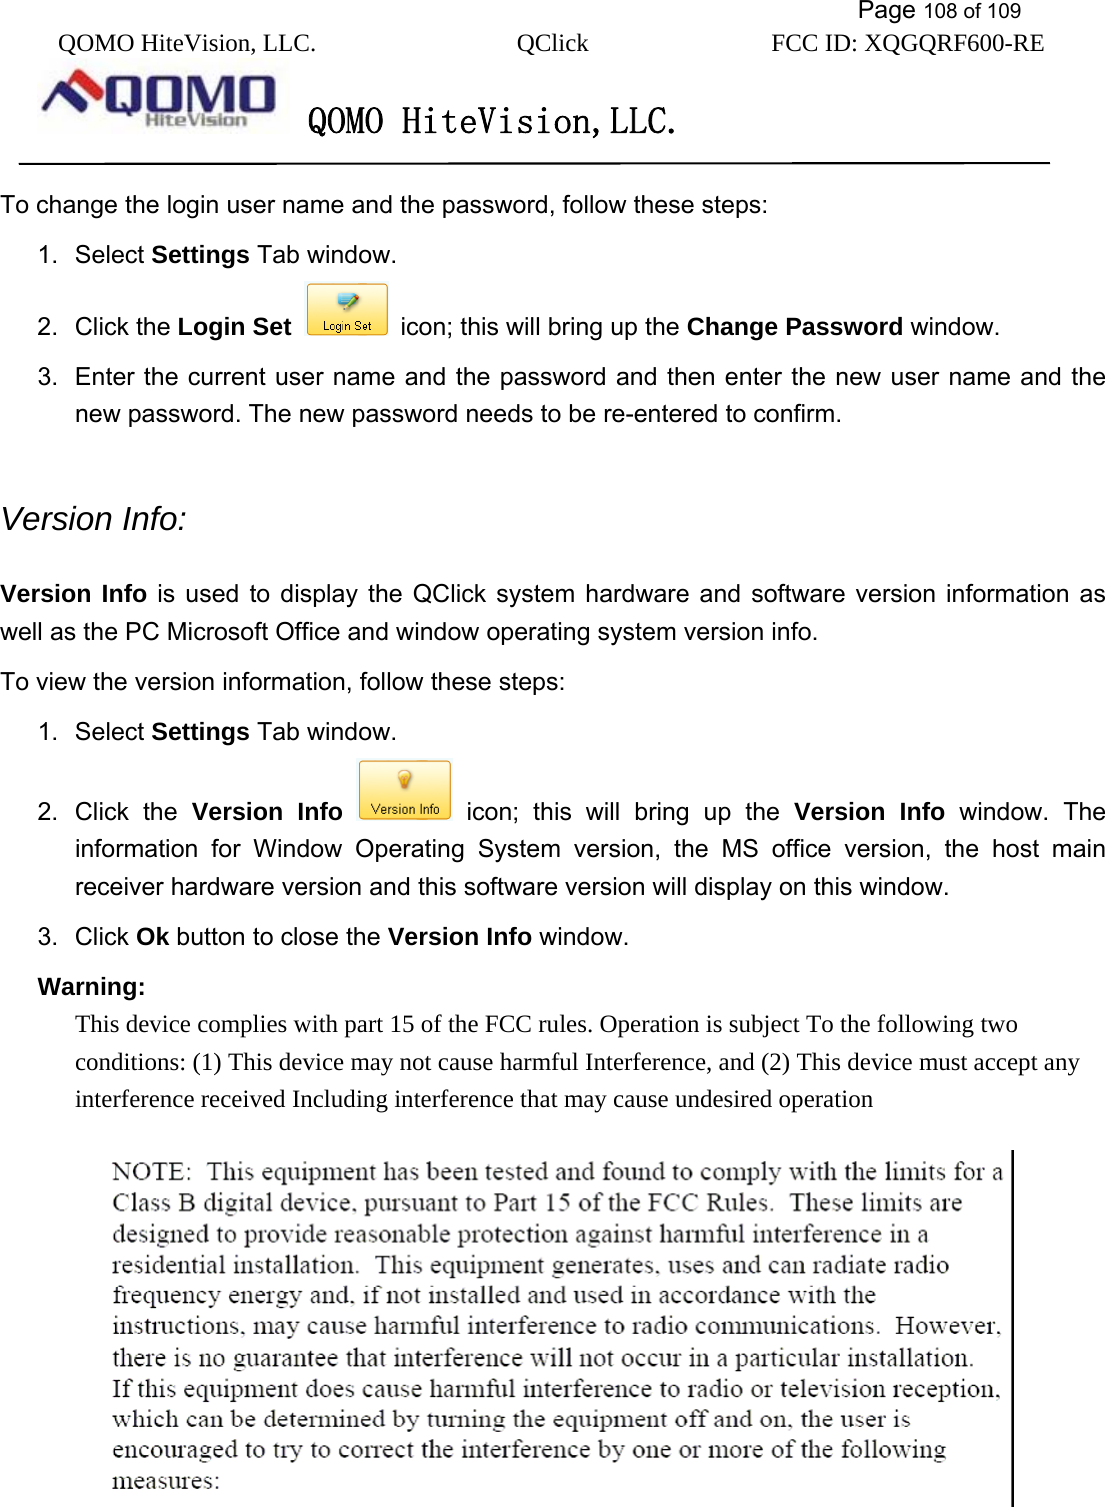           Page 108 of 109 QOMO HiteVision, LLC.  QClick        FCC ID: XQGQRF600-RE     QOMO HiteVision,LLC.   To change the login user name and the password, follow these steps: 1. Select Settings Tab window. 2. Click the Login Set   icon; this will bring up the Change Password window. 3.  Enter the current user name and the password and then enter the new user name and the new password. The new password needs to be re-entered to confirm.  Version Info:   Version Info is used to display the QClick system hardware and software version information as well as the PC Microsoft Office and window operating system version info.   To view the version information, follow these steps: 1. Select Settings Tab window. 2. Click the Version Info  icon; this will bring up the Version Info window. The information for Window Operating System version, the MS office version, the host main receiver hardware version and this software version will display on this window. 3. Click Ok button to close the Version Info window. Warning: This device complies with part 15 of the FCC rules. Operation is subject To the following two conditions: (1) This device may not cause harmful Interference, and (2) This device must accept any interference received Including interference that may cause undesired operation     